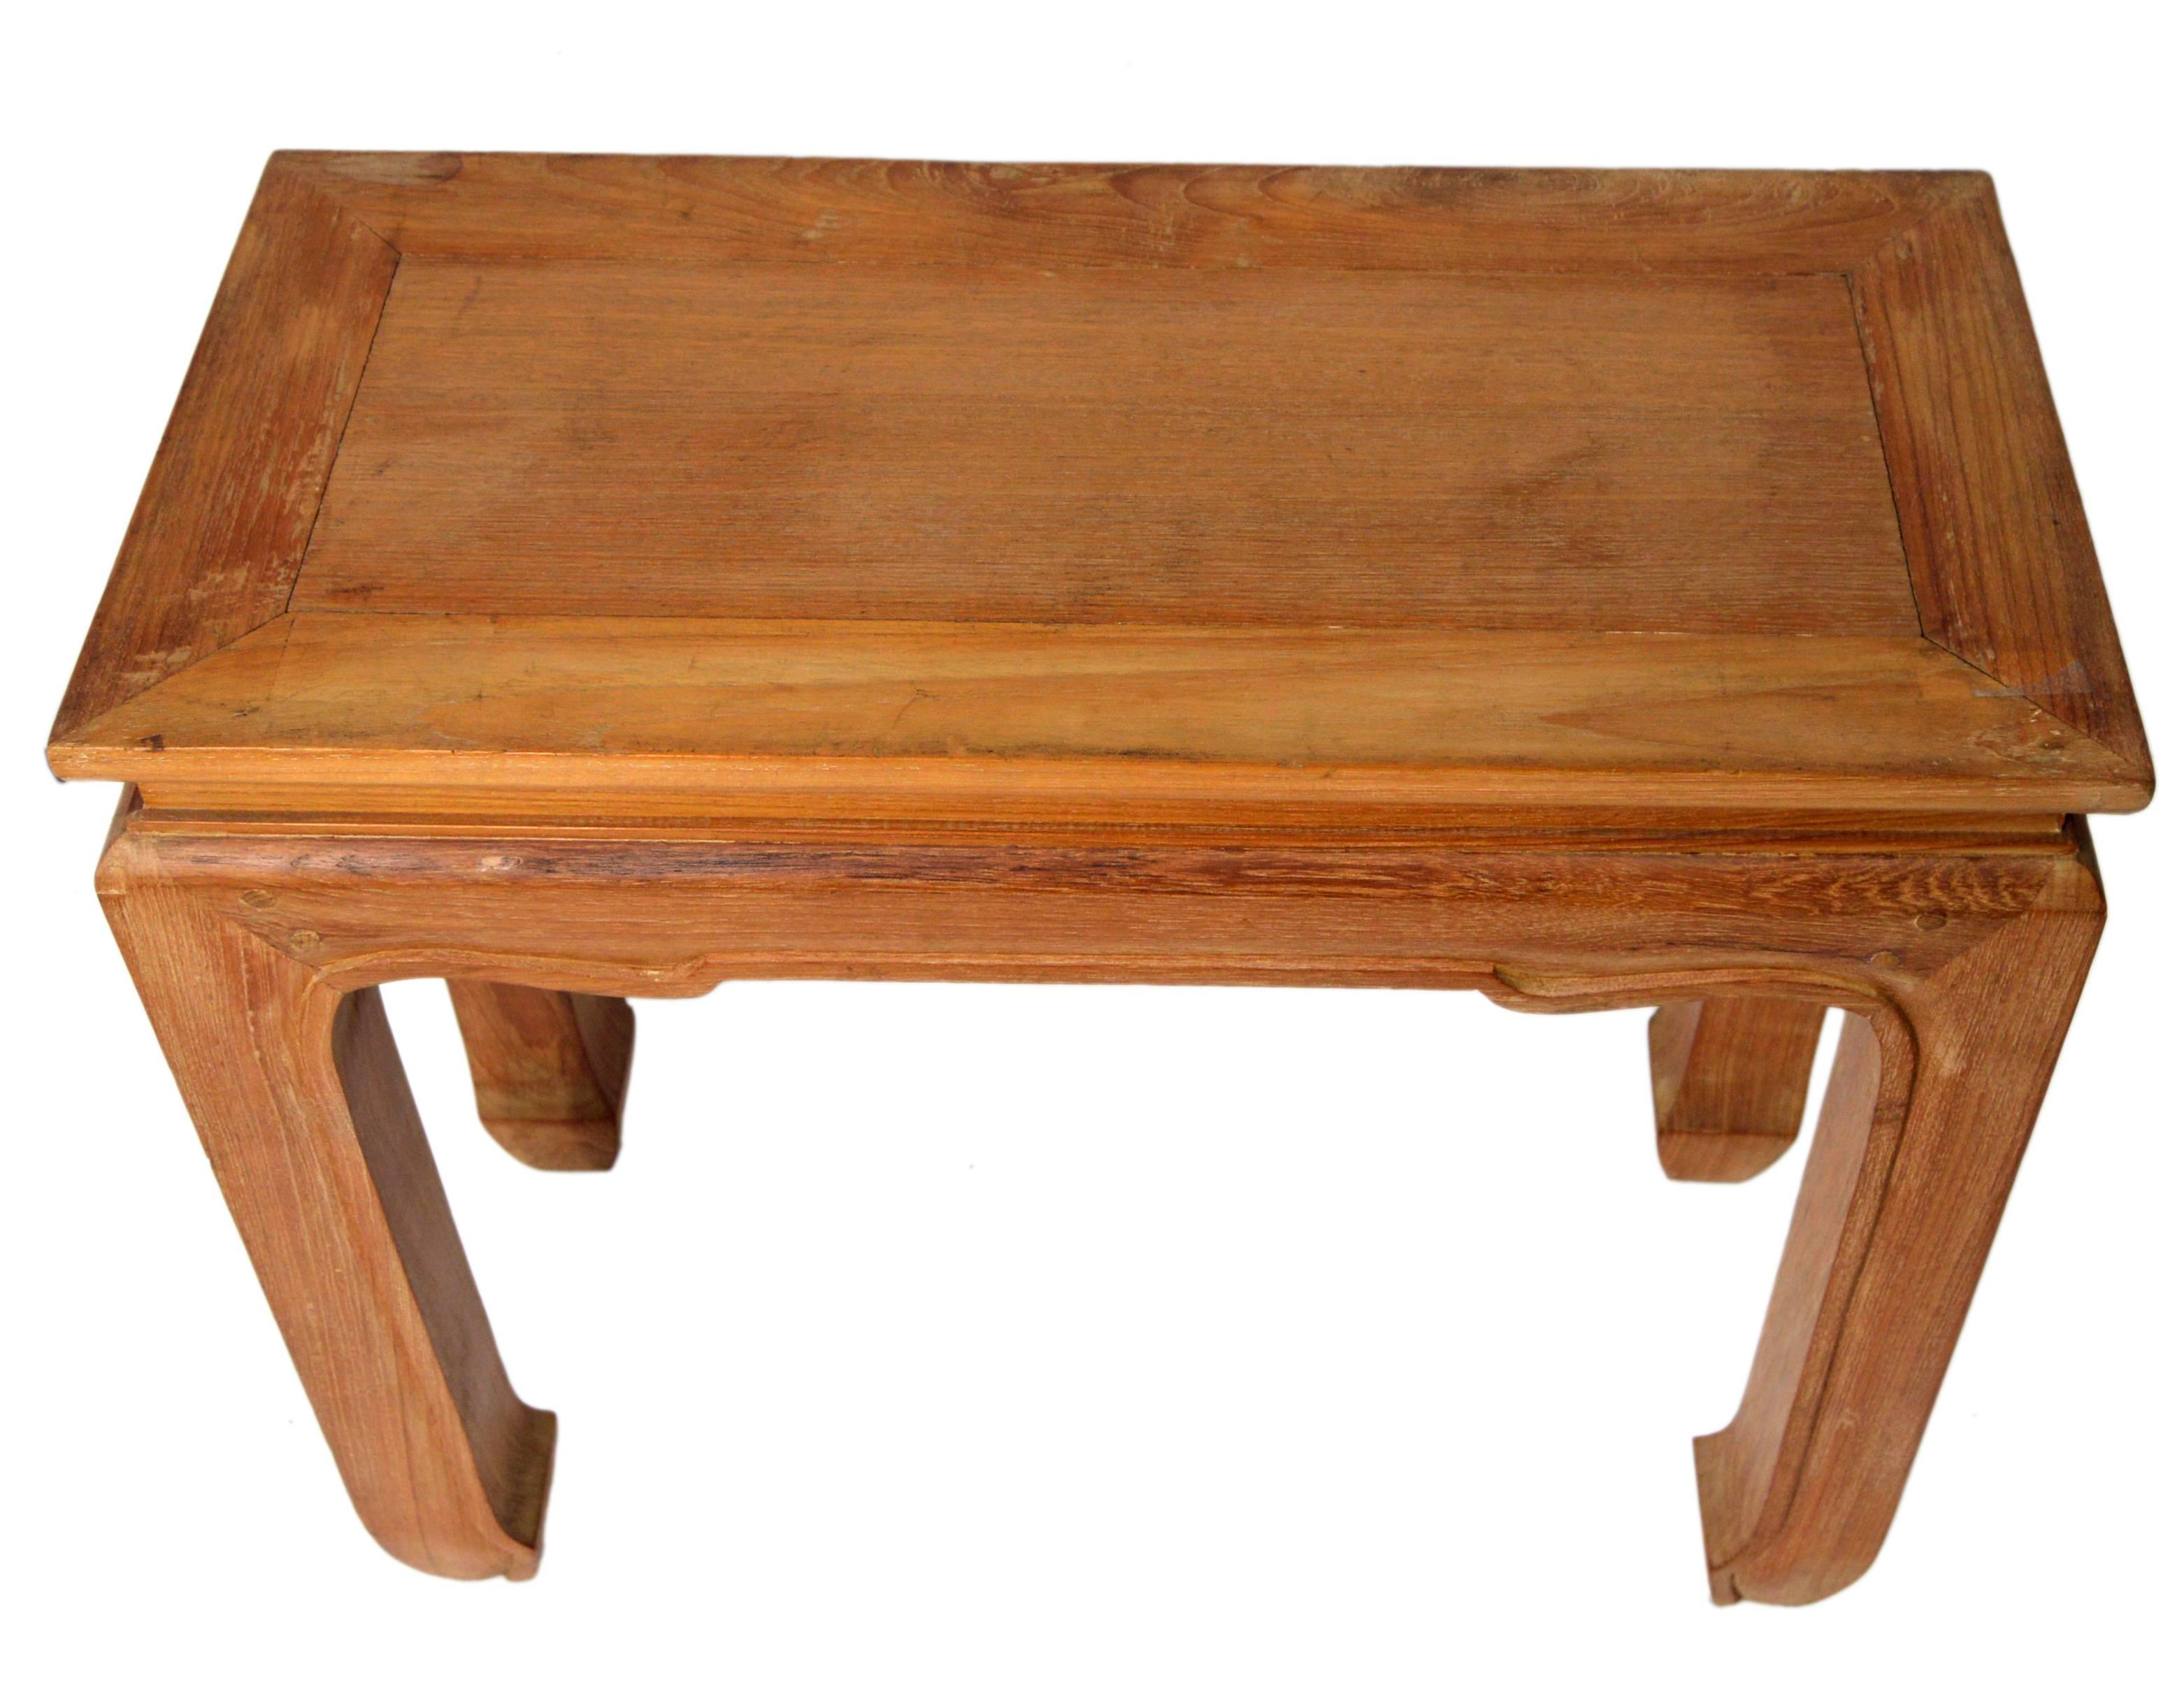 A vintage 1960s Ming style Chinese side table handmade from lacquered natural wood. This small rectangular side table features a rectangular top sitting above a recessed molding, over a delicately carved apron. The table is raised on four